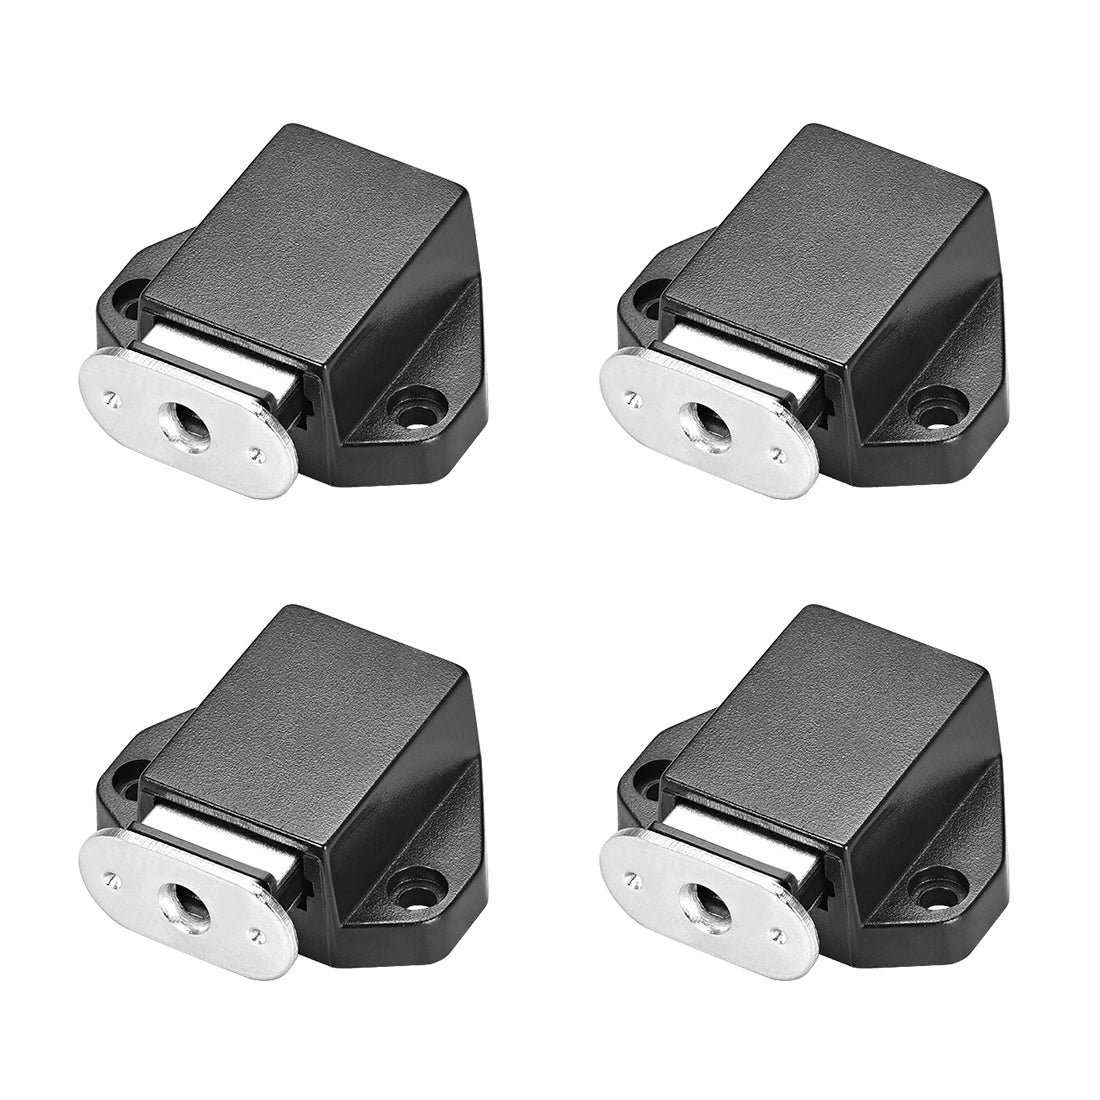 uxcell Uxcell Touch Magnetic Latches Press Catch Latch for Cabinet Door Cupboard Black 4pcs